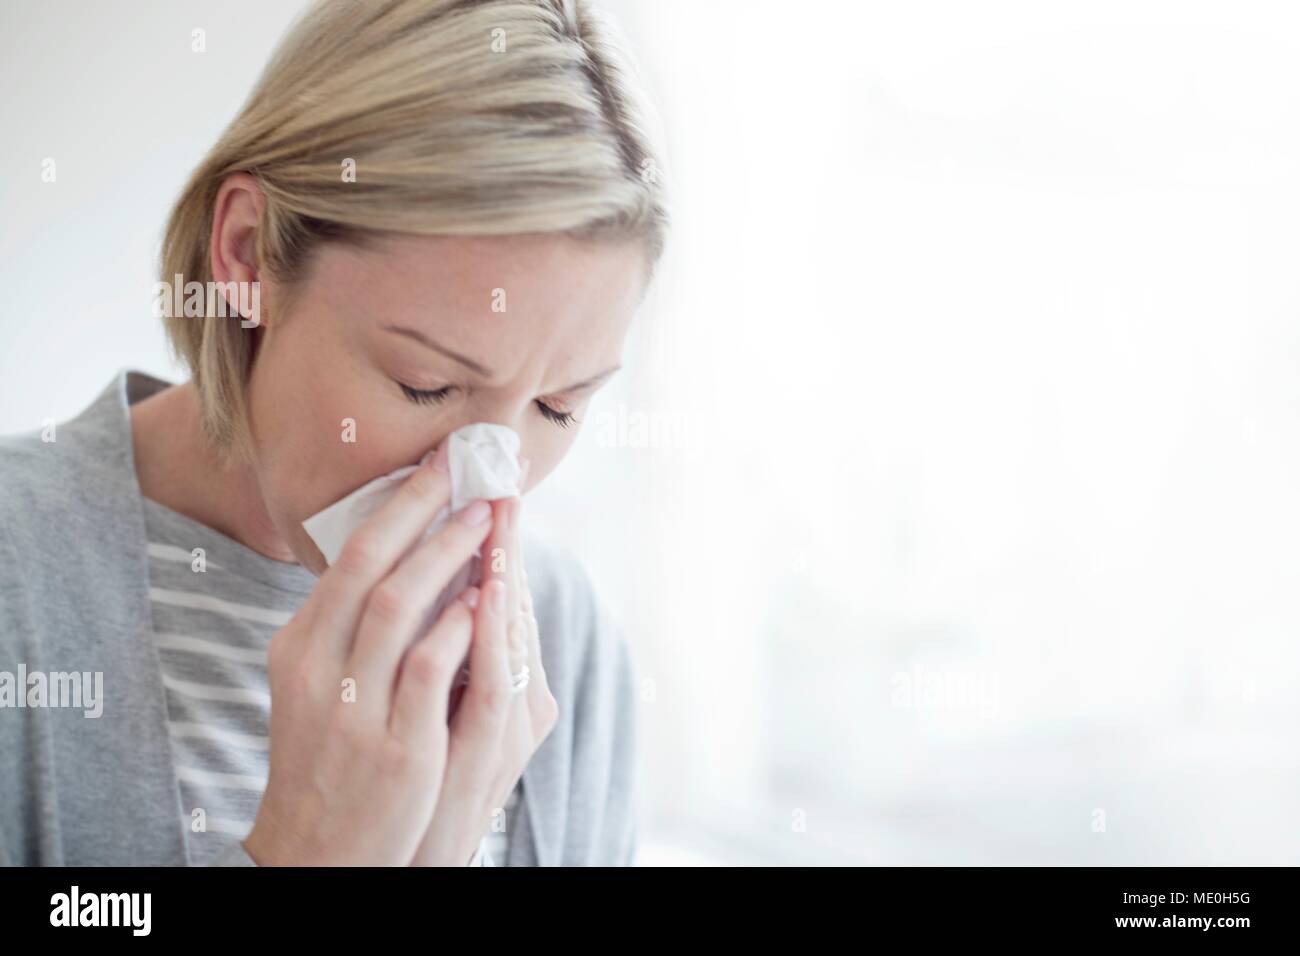 Mid adult woman blowing her nose. Stock Photo